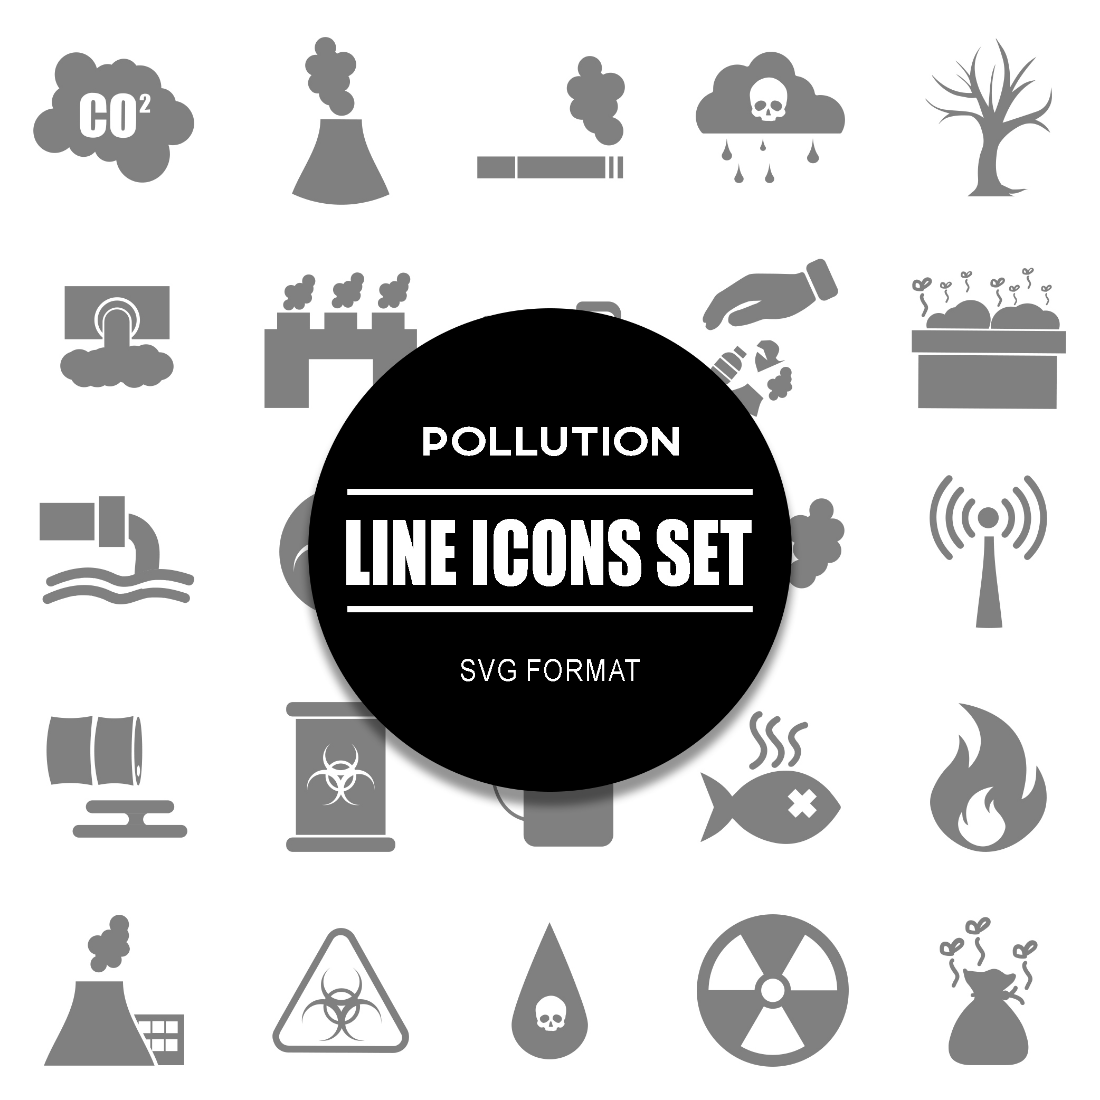 Pollution Icon Set cover image.